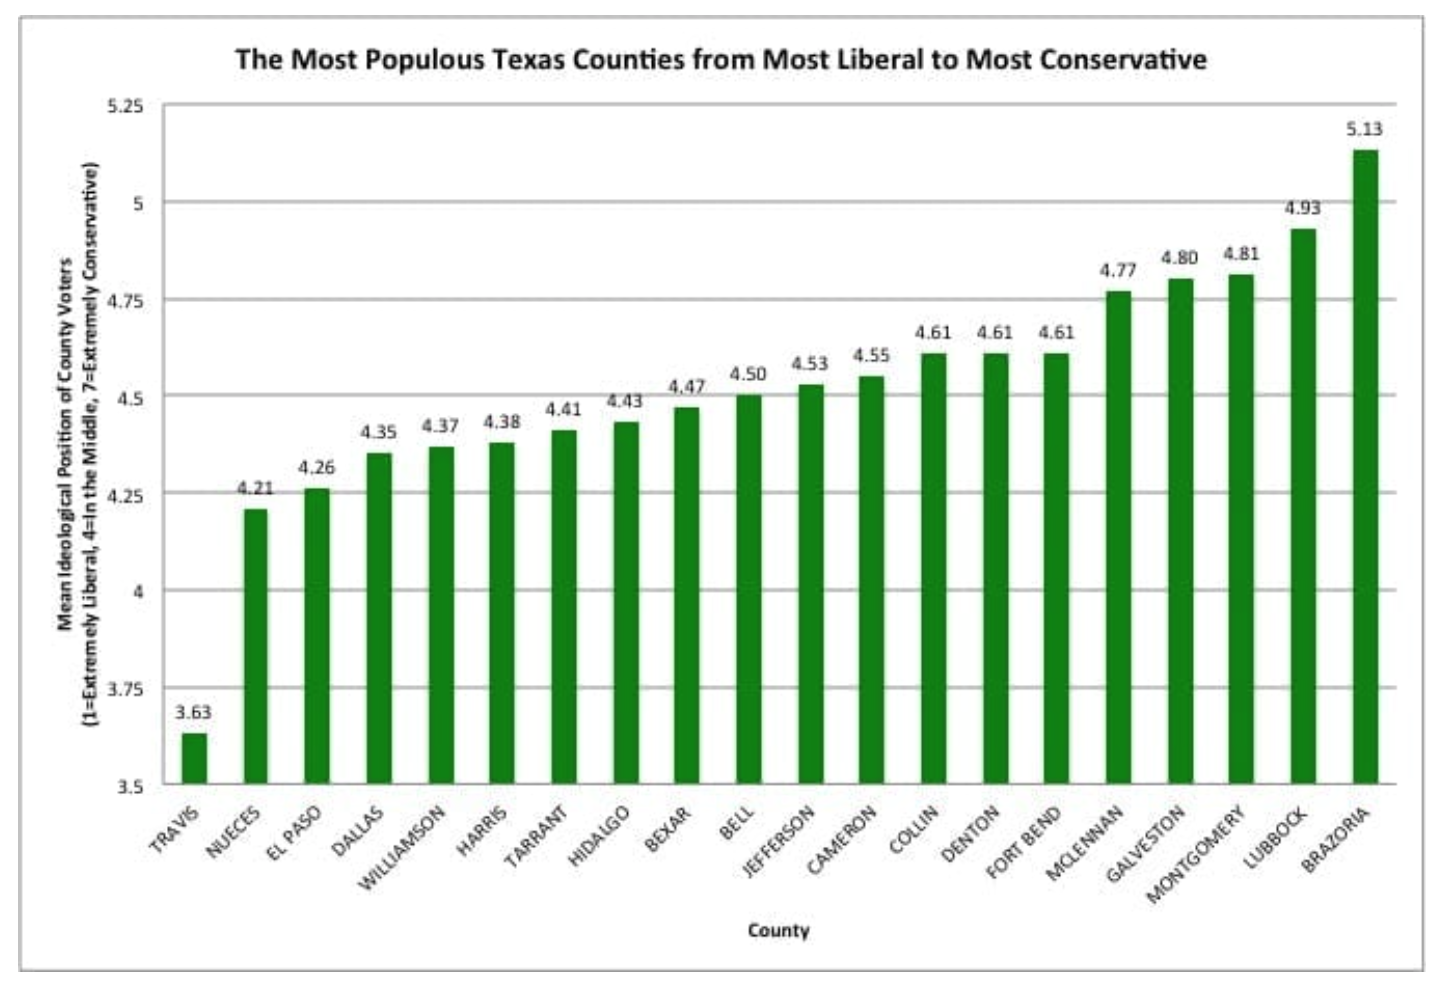 Most populous Texas counties from most liberal to most conservative